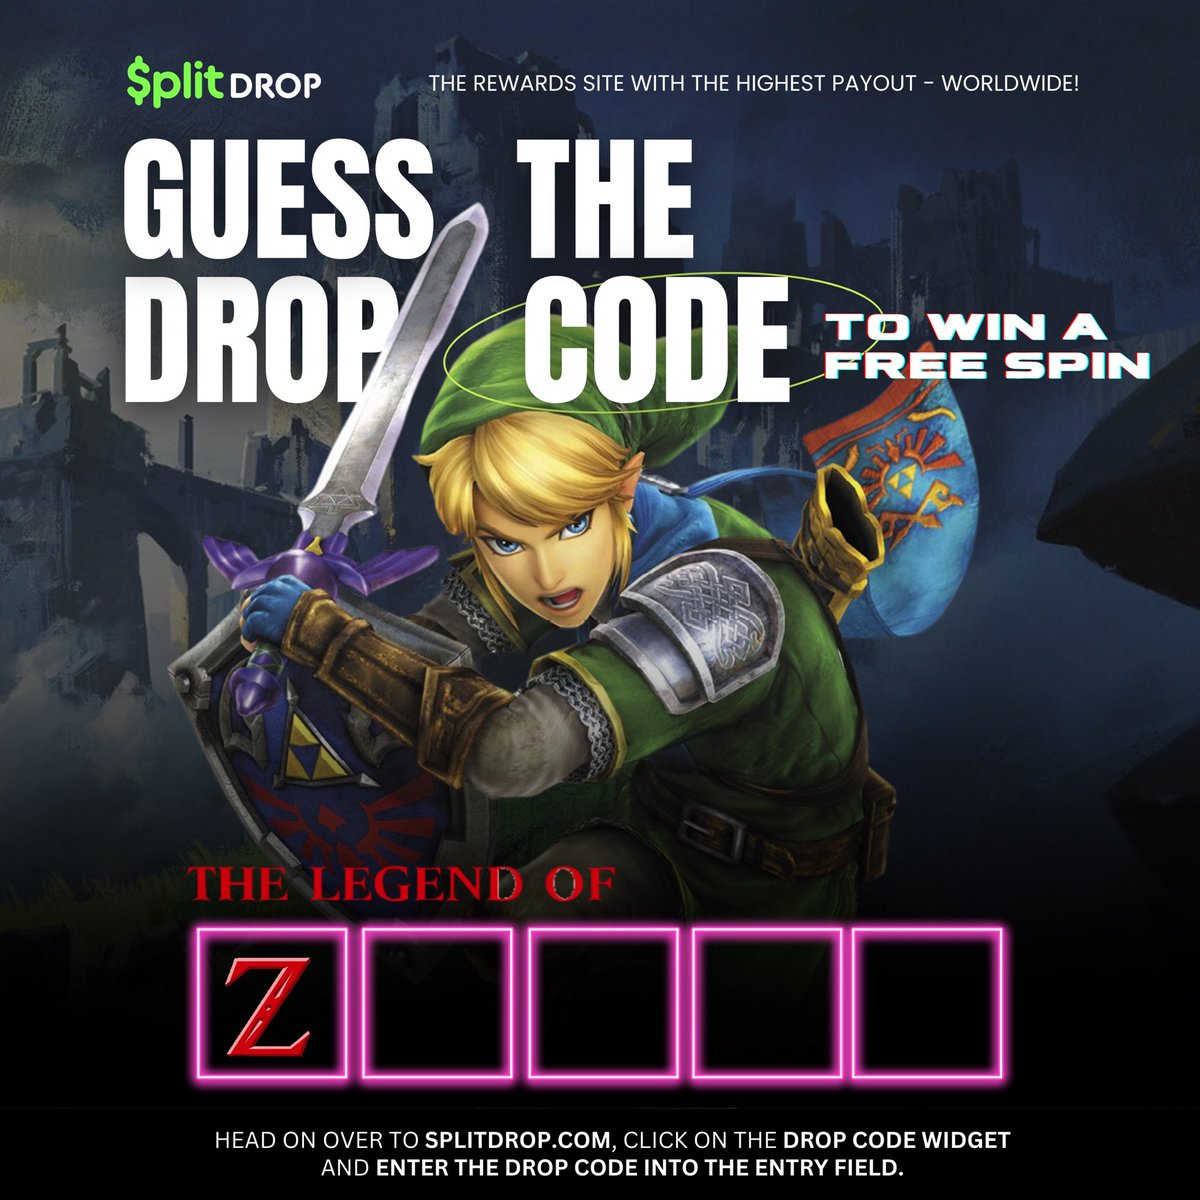 Guess The Drop Code and Win!

You can win up to 250,000 Coins. That's $250 INSTANTLY!

DROP CODE EXPIRES on Midnight New York time. So hurry and get your code!

#RewardsSite #Play2Earn #P2E #PlayToEarn #PaidSurveys #GamingCommunity #P2EGame #PlayAndWin #EarnMoneyOnline